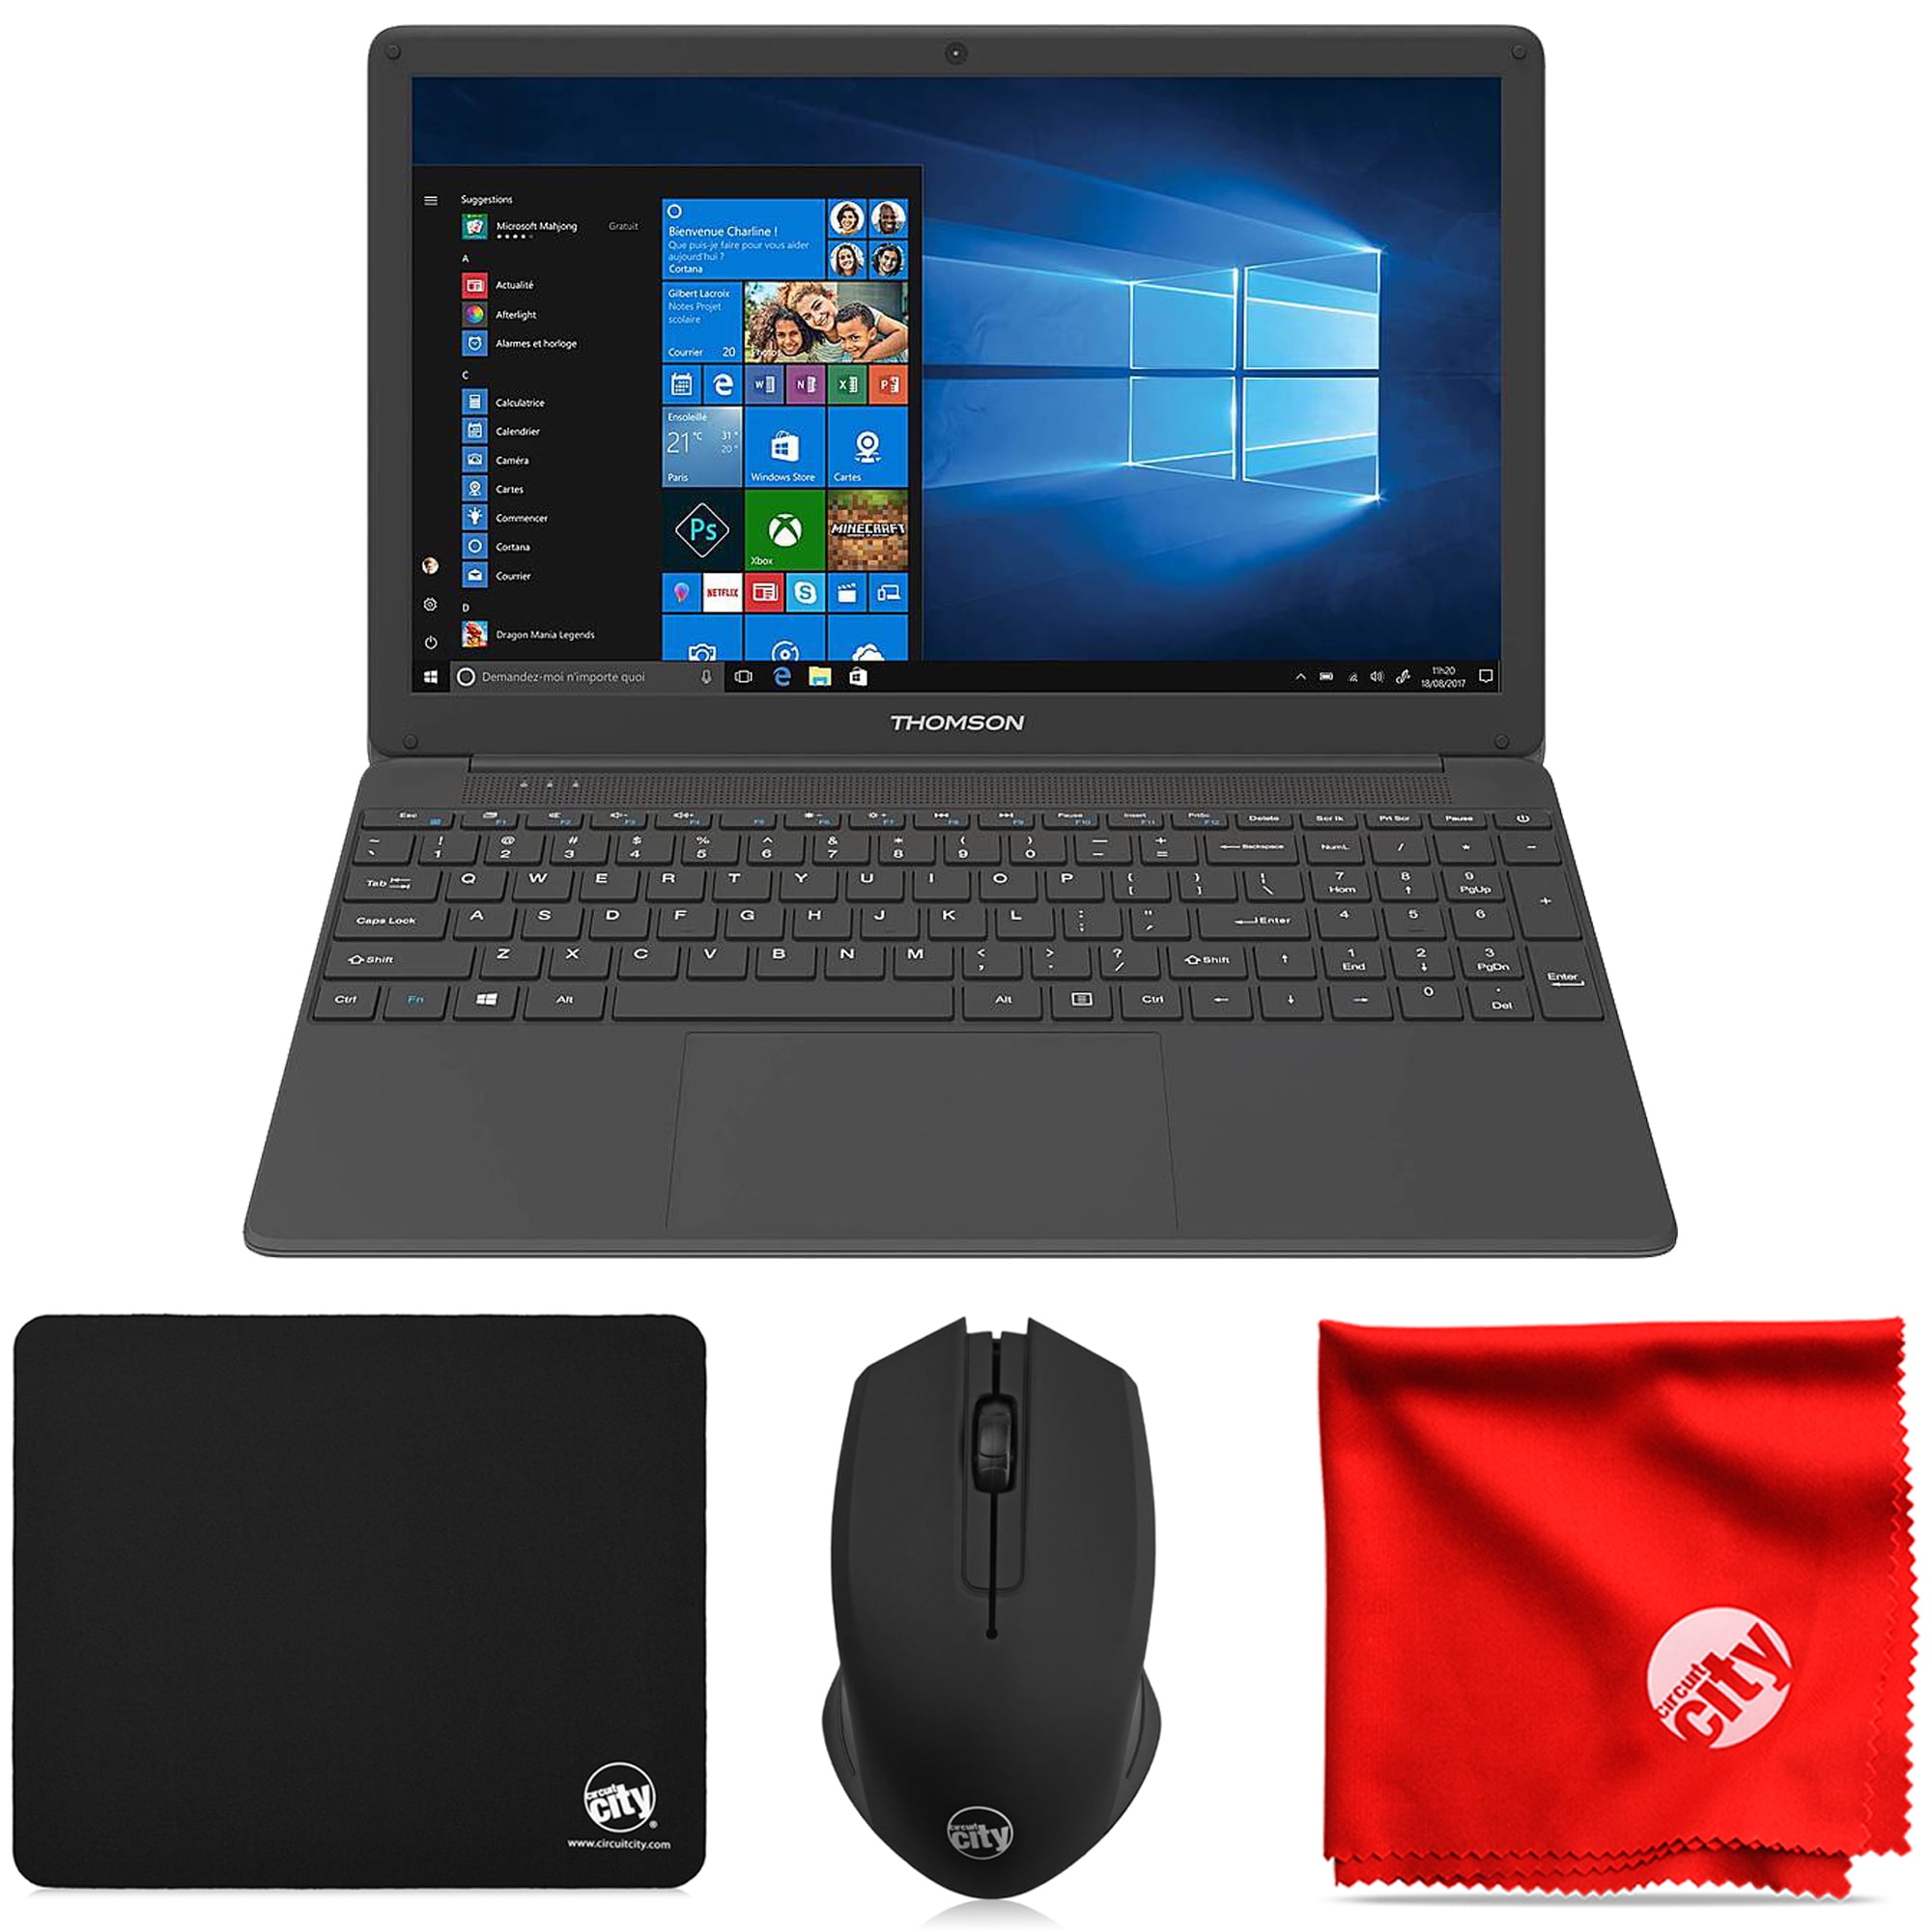 Thomson Neo 15.6-Inch HD (Intel 5th Generation Core i5 2.7GHz, 8GB RAM, 1TB  HDD, Intel Iris Graphics 6100 Windows 10 Home) Laptop Computer Bundle with  Mouse Pad, Mouse, Microfiber Cloth 